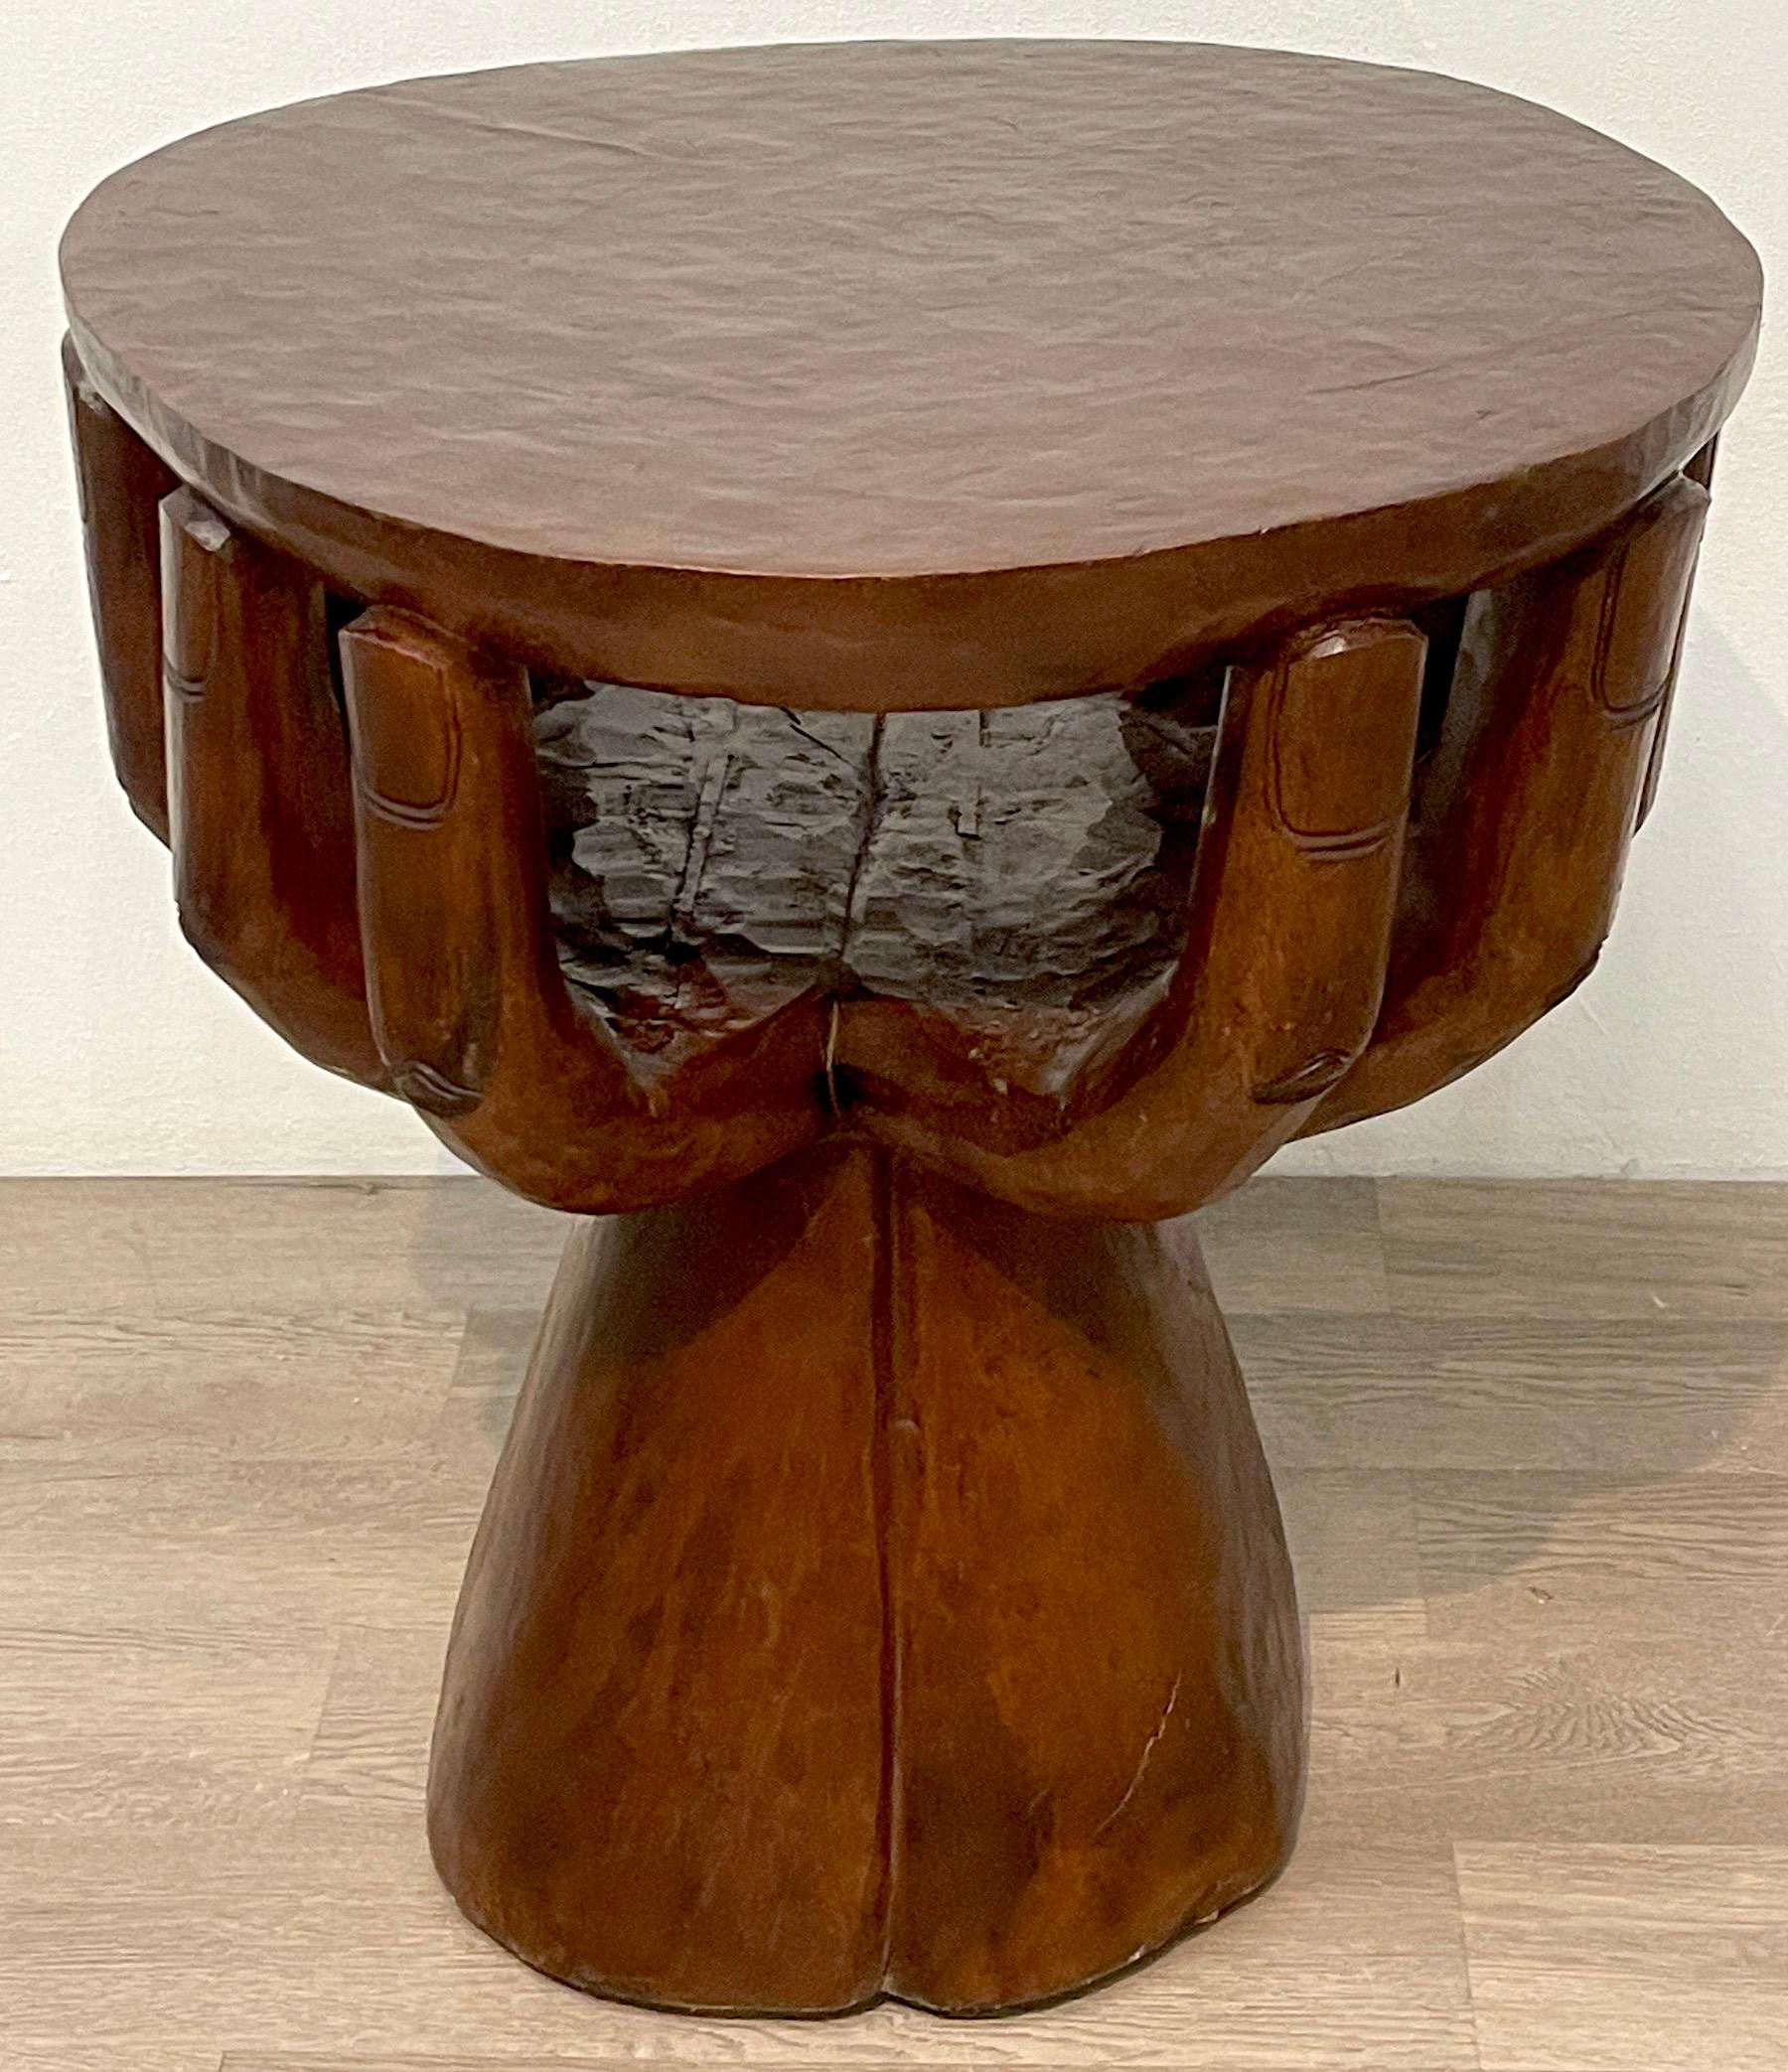 Two-tiered cupped hands table, in the manner of Pedro Friedeberg 
Well carved of hardwood, the 24.5-Inch diameter top resting on the fingertips of two hands, creating a 15-Inch deep x 12.5- Inch wide x 7-Inch high lower shelf. Raised on a 13-Inch